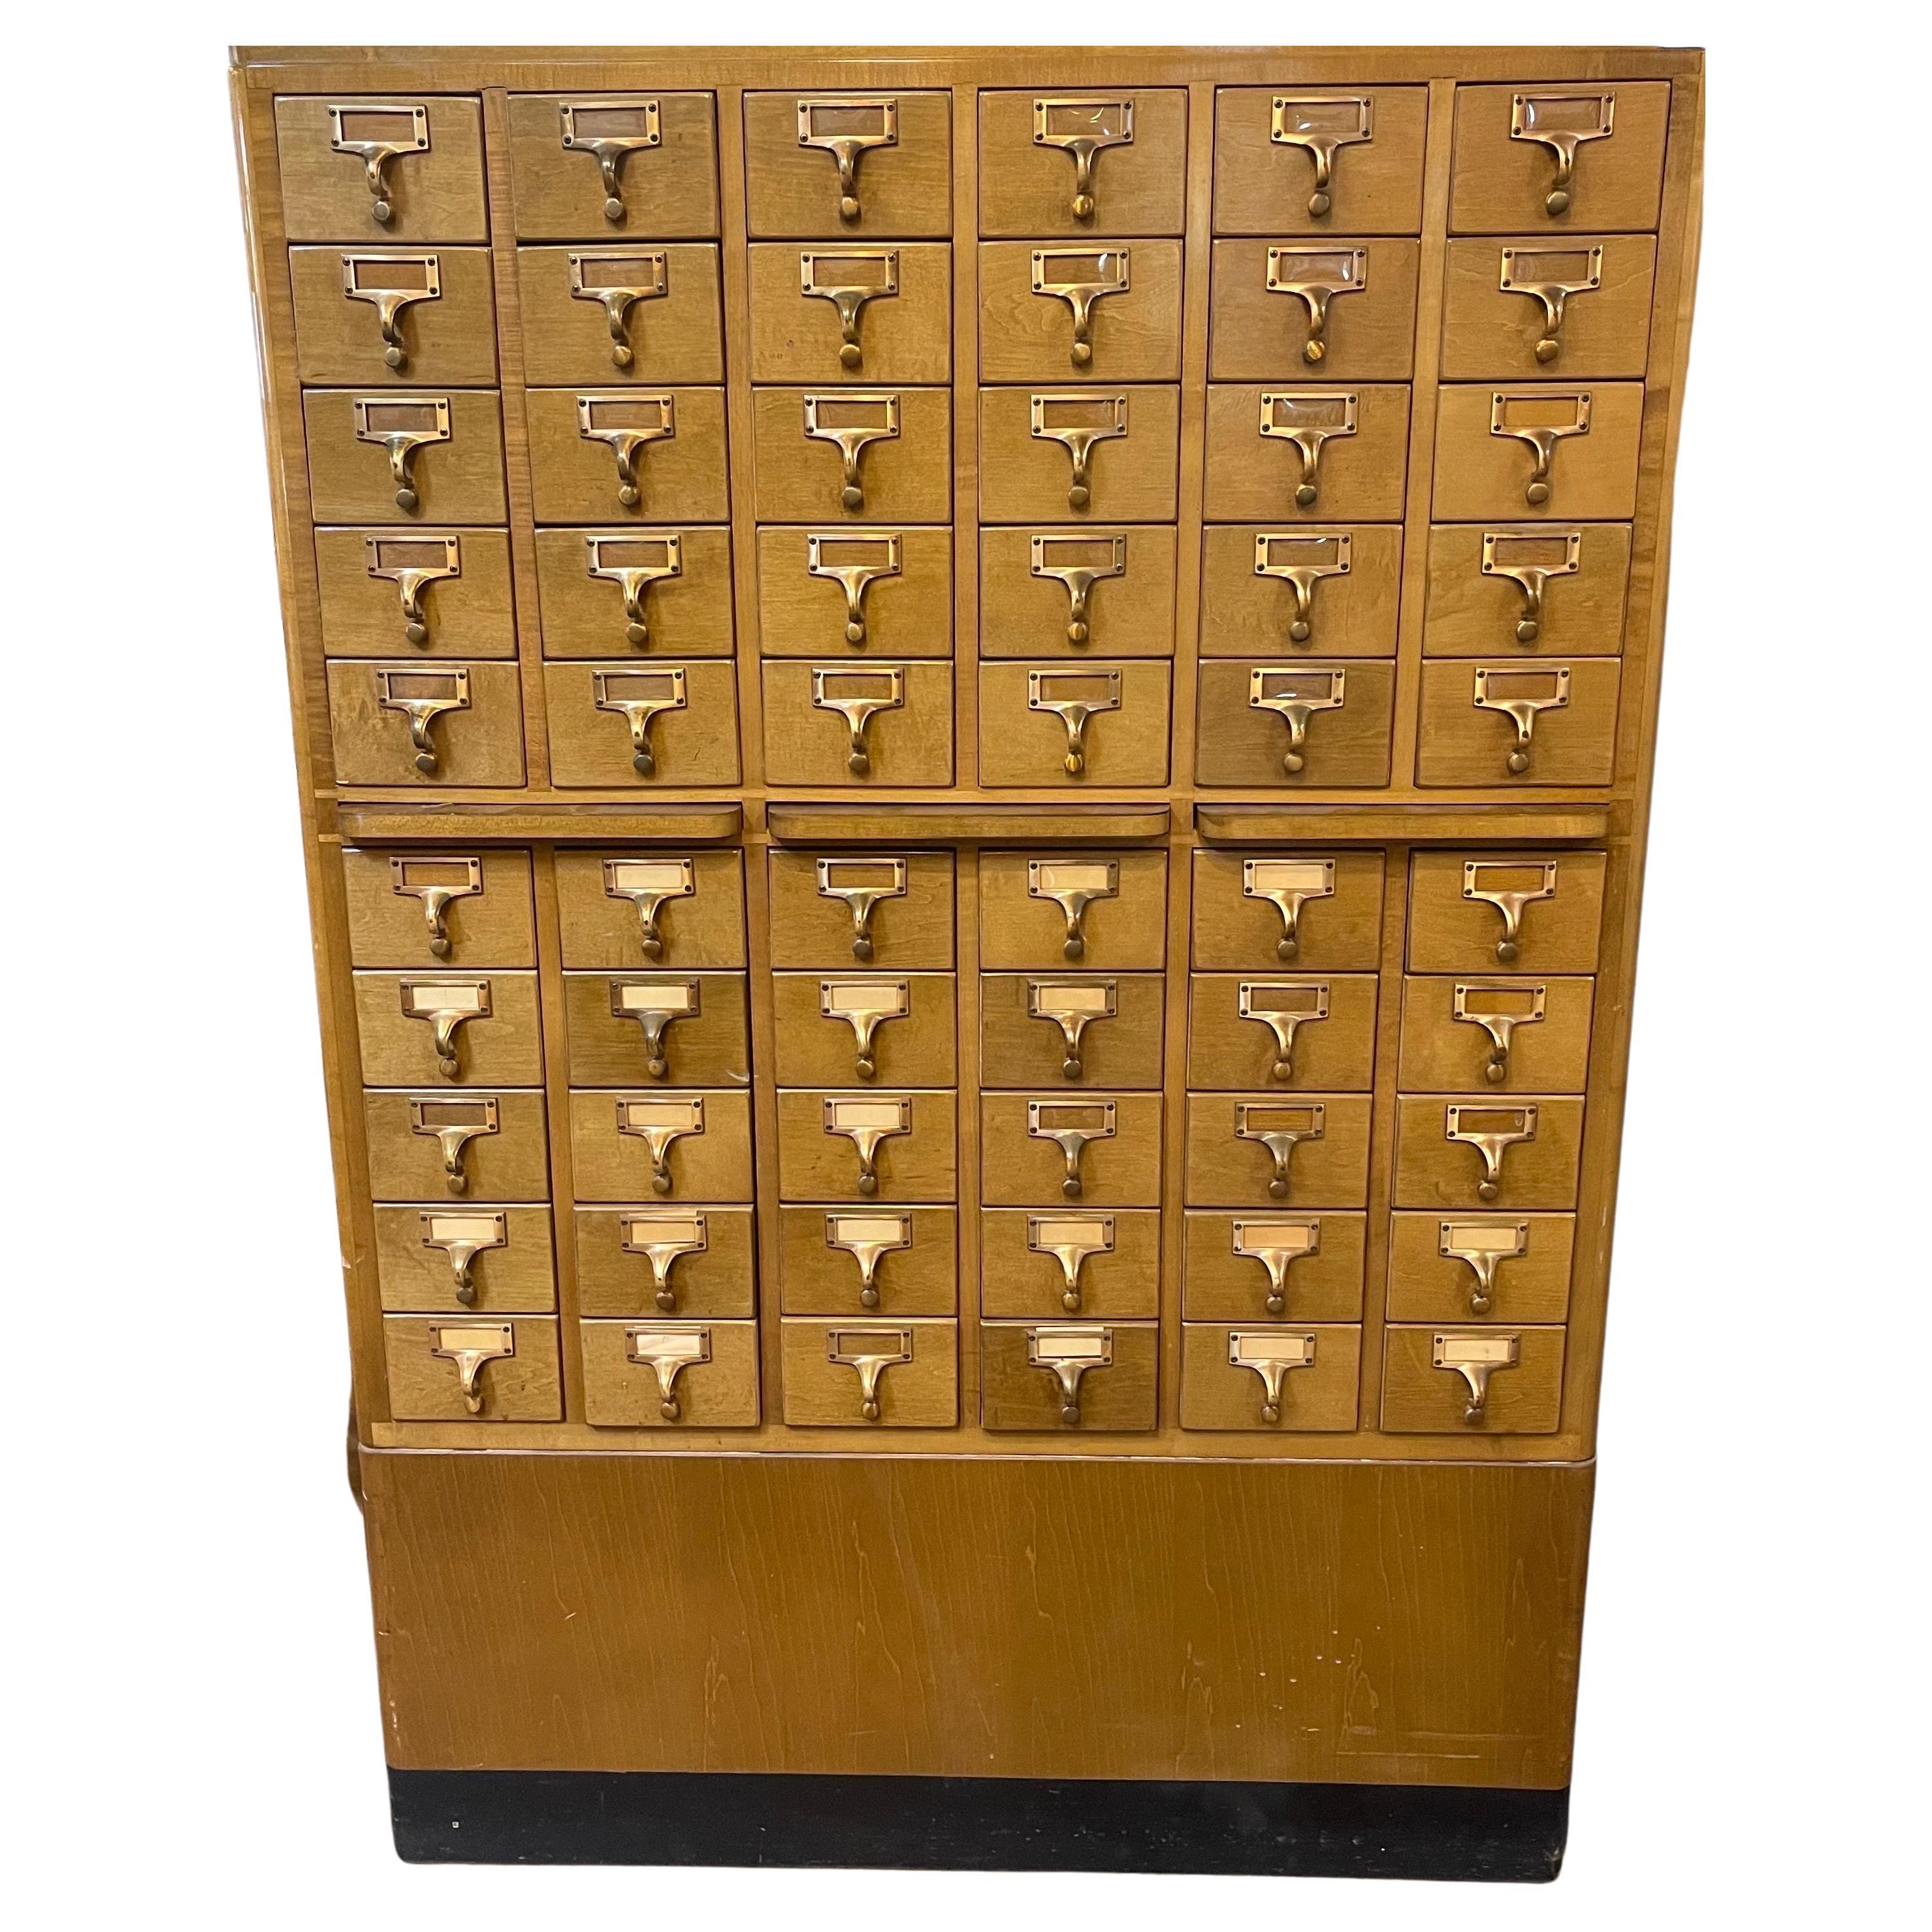 A very nice sixty drawer library card catalog in blond wood (maple?) by Gaylord Brothers, circa 1960s. The piece is in very good vintage condition and finished on all sides with brass hardware pulls. It measures approximately 36